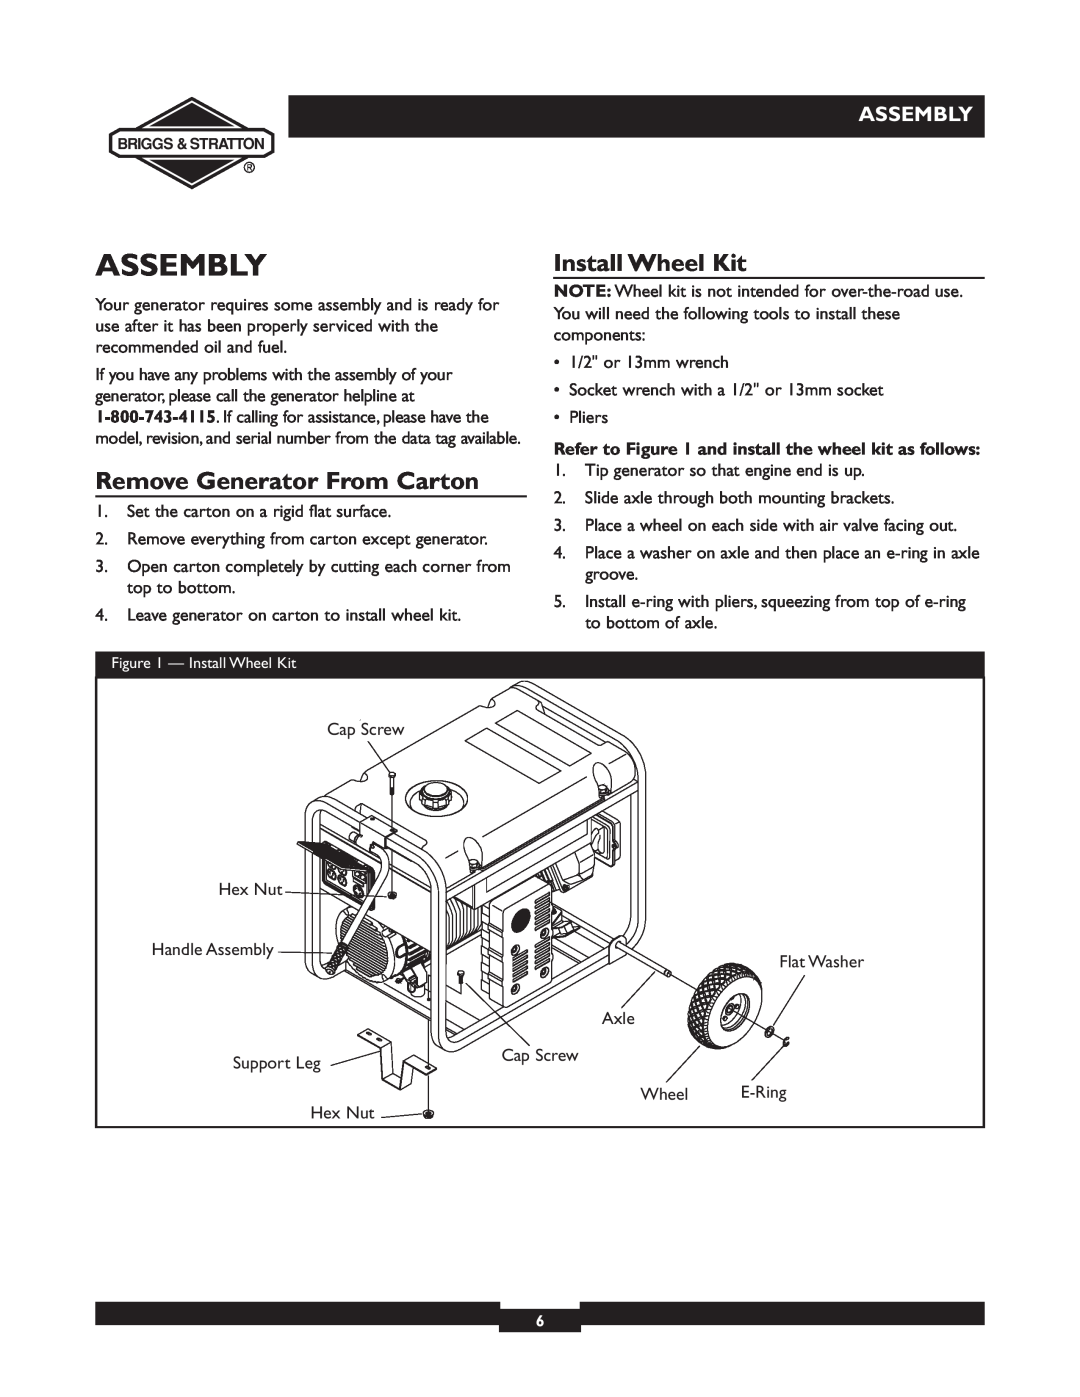 Briggs & Stratton 30238 owner manual Assembly, Install Wheel Kit, Remove Generator From Carton 